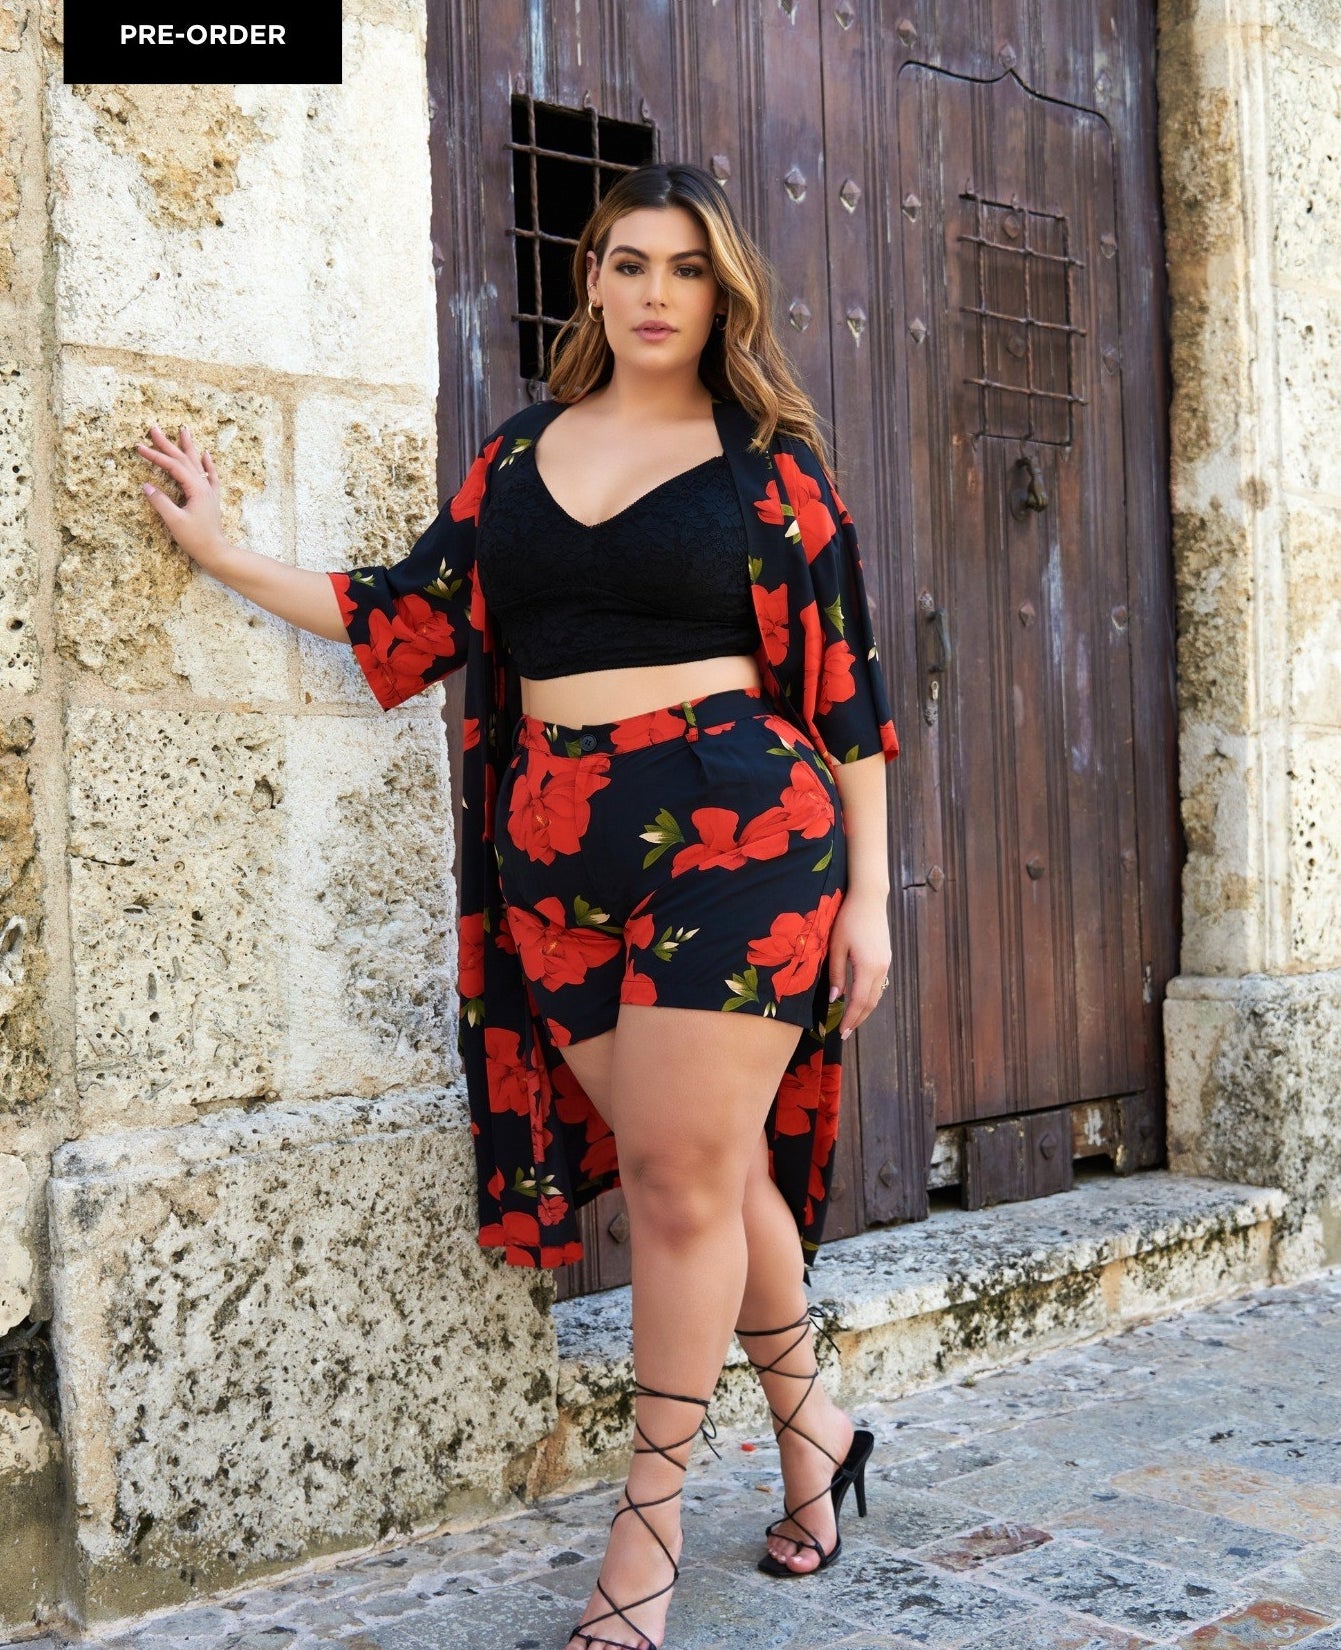 model posing in floral robe and shorts